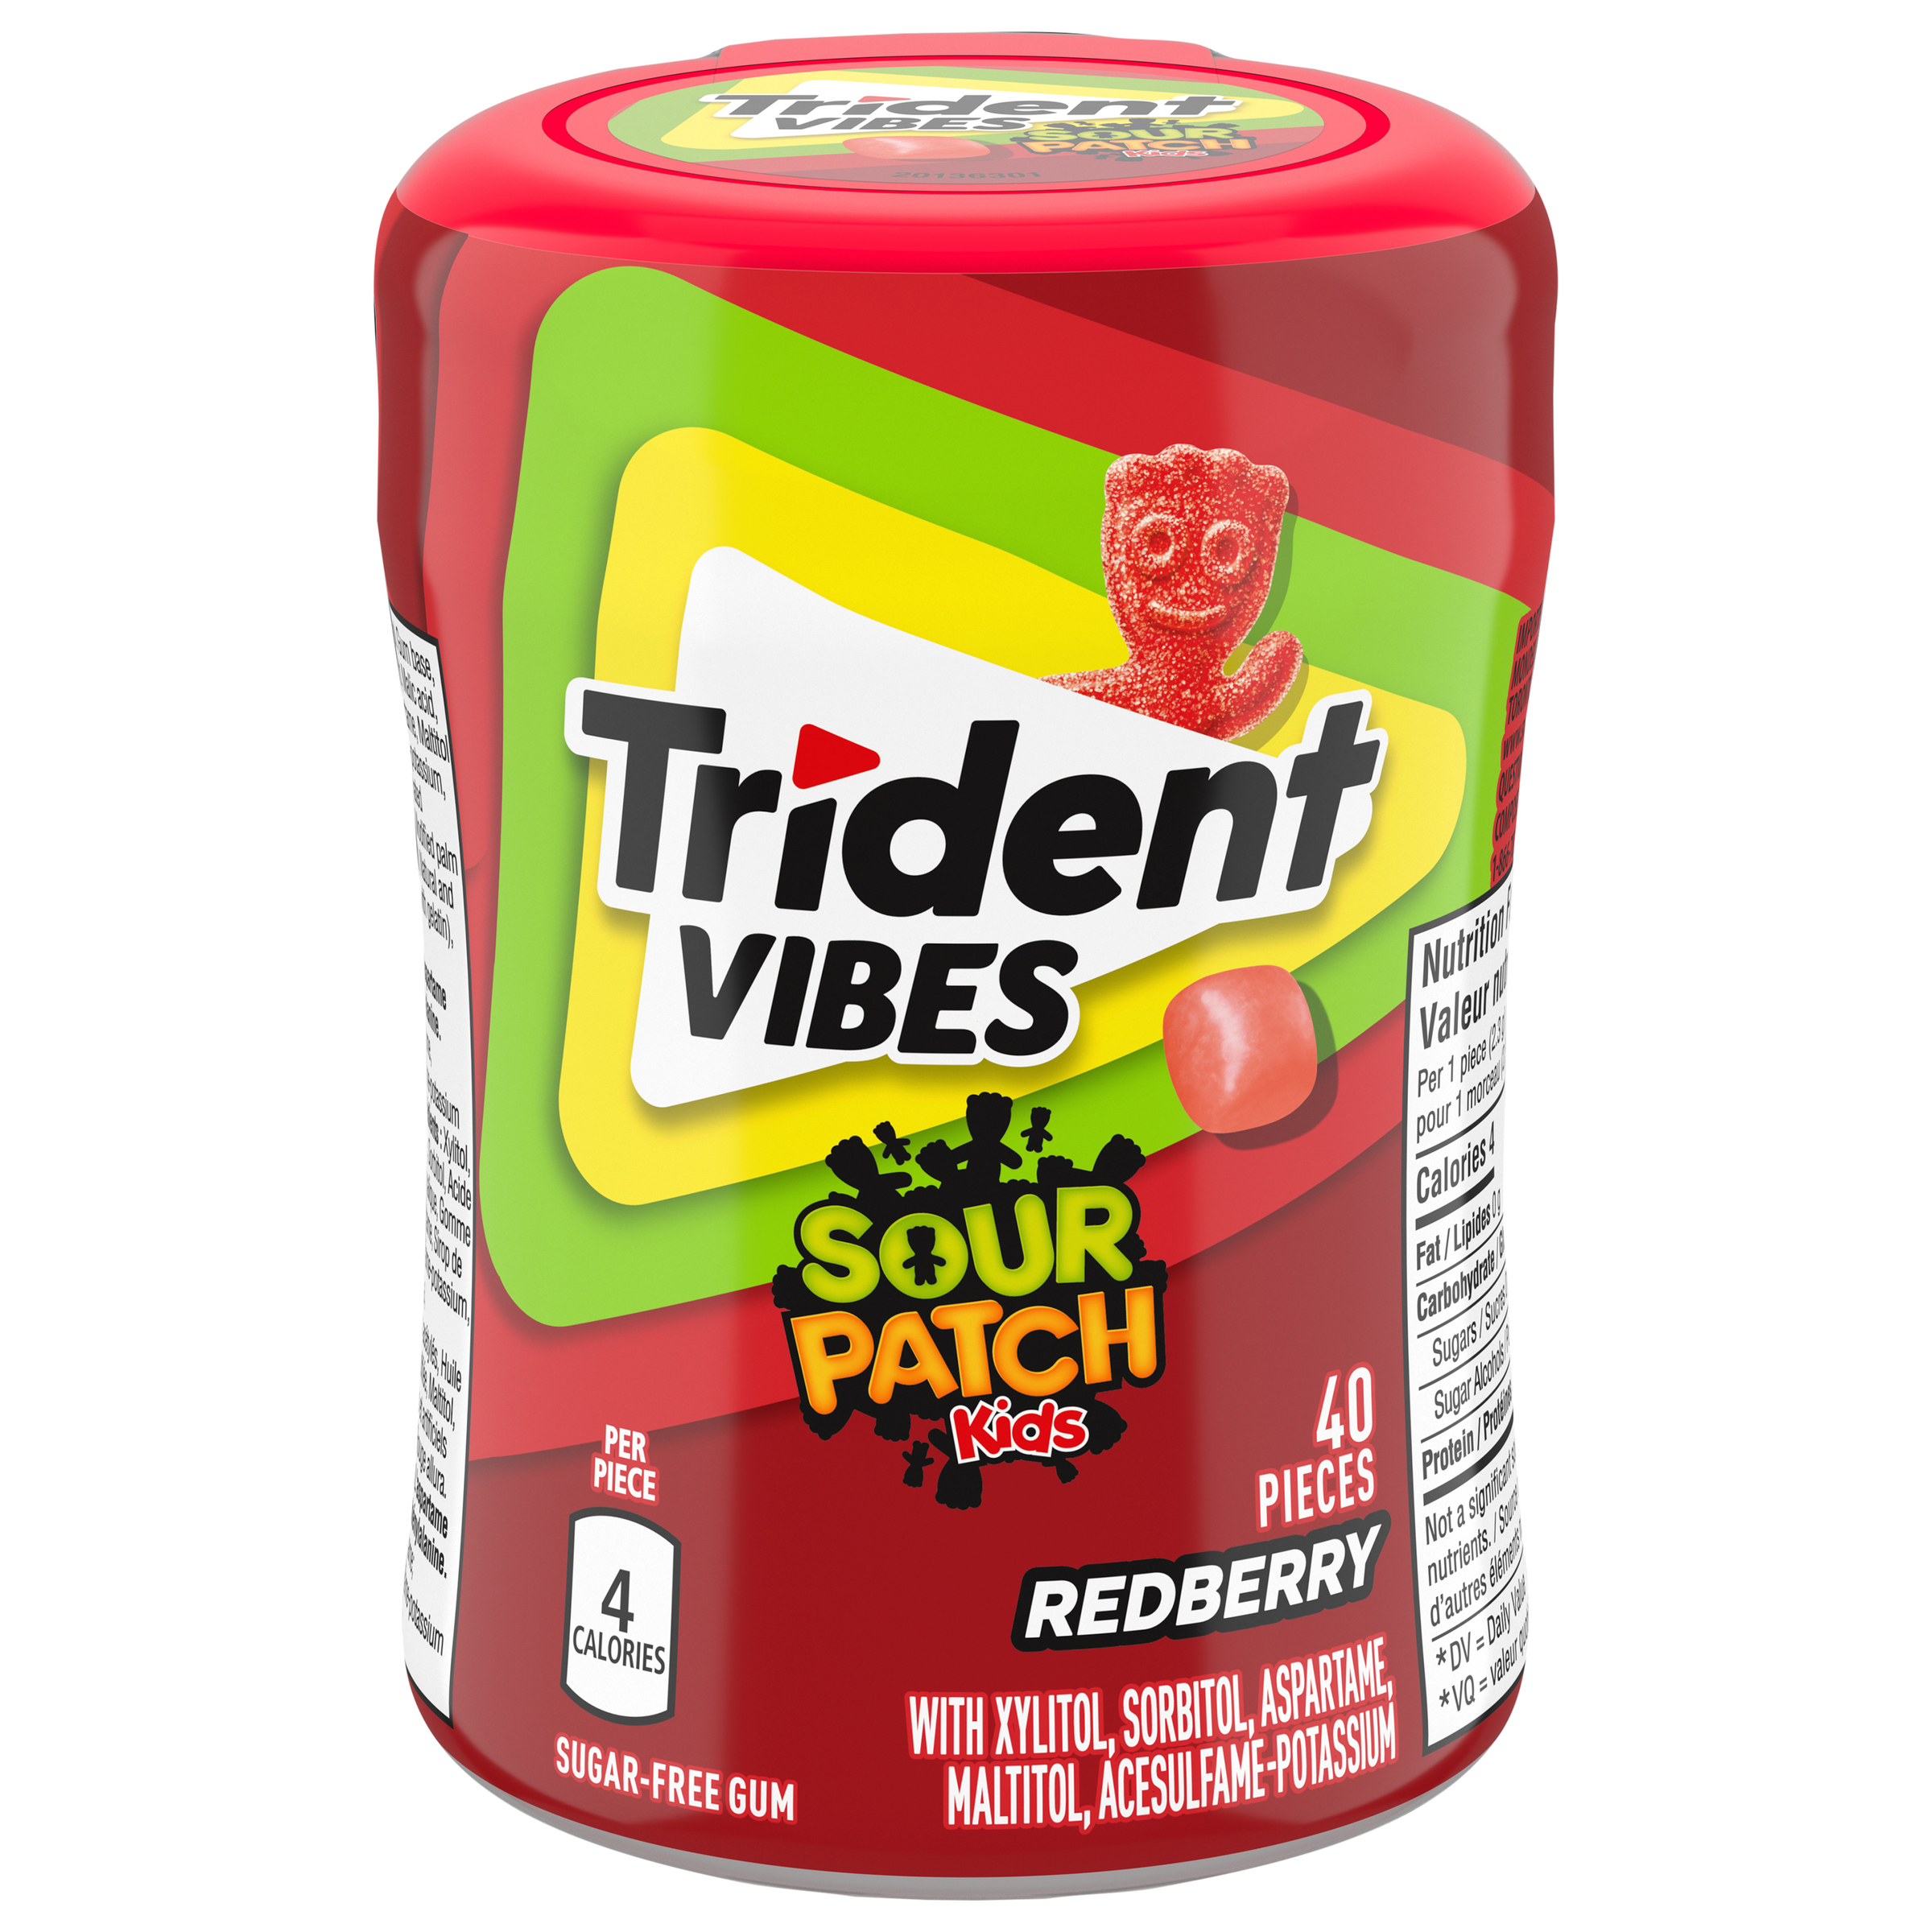 Trident Vibes Red Berry Gum 40 N